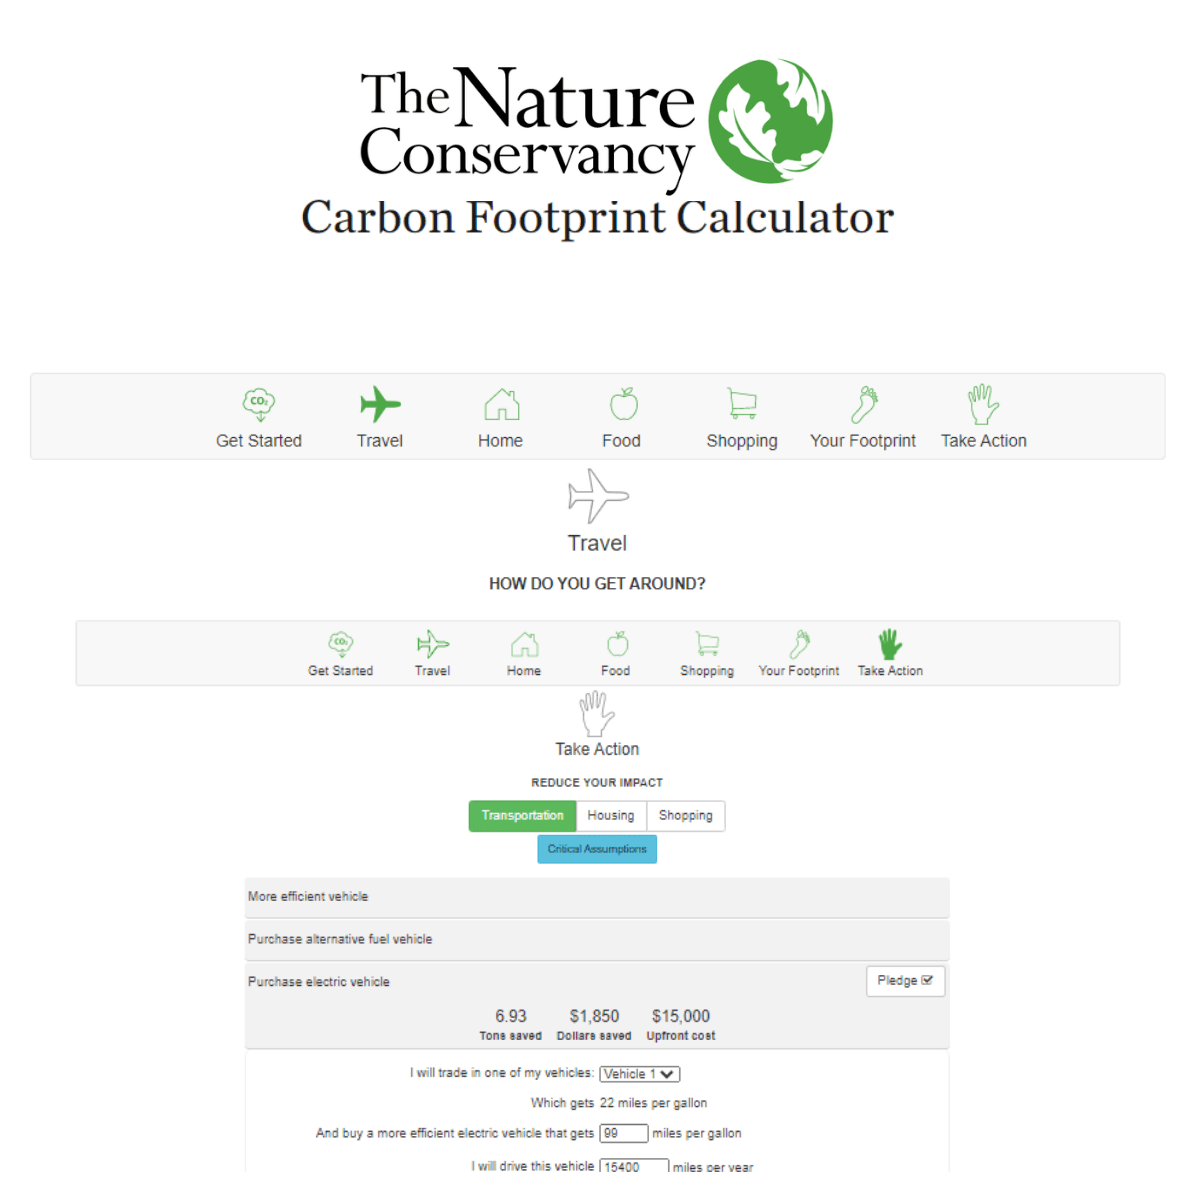 The Nature Conservancy Carbon Footprint Calculator